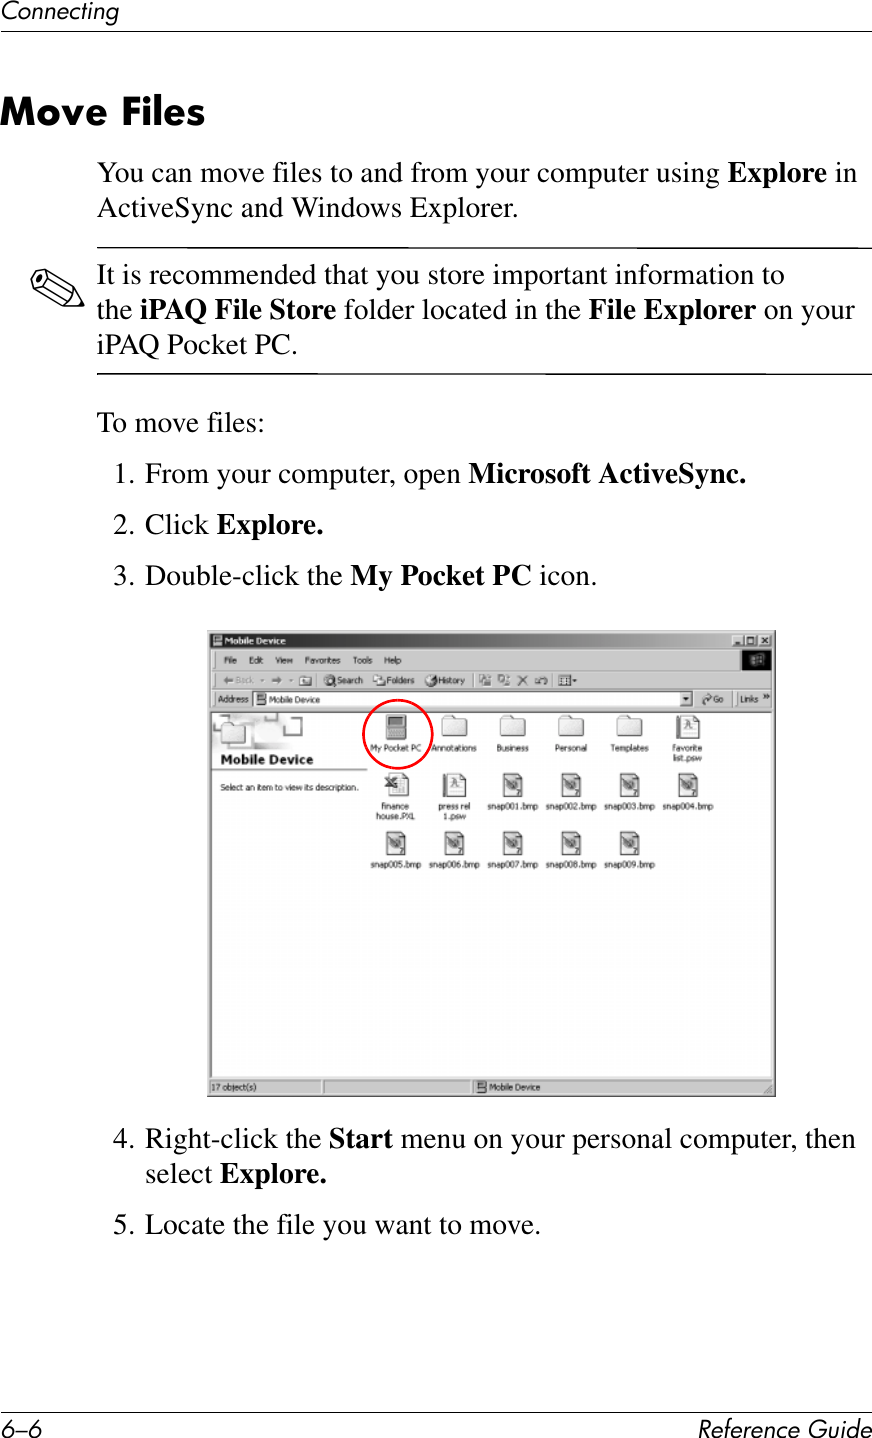 E/E !&quot;#&quot;$&quot;%&amp;&quot;&apos;()*+&quot;67%%&quot;&amp;1*%2Y6N&quot;&amp;E)@&quot;8You can move files to and from your computer using Explore in ActiveSync and Windows Explorer.✎It is recommended that you store important information to the iPAQ File Store folder located in the File Explorer on your iPAQ Pocket PC.To move files:1. From your computer, open Microsoft ActiveSync.2. Click Explore.3. Double-click the My Pocket PC icon.4. Right-click the Start menu on your personal computer, then select Explore.5. Locate the file you want to move.